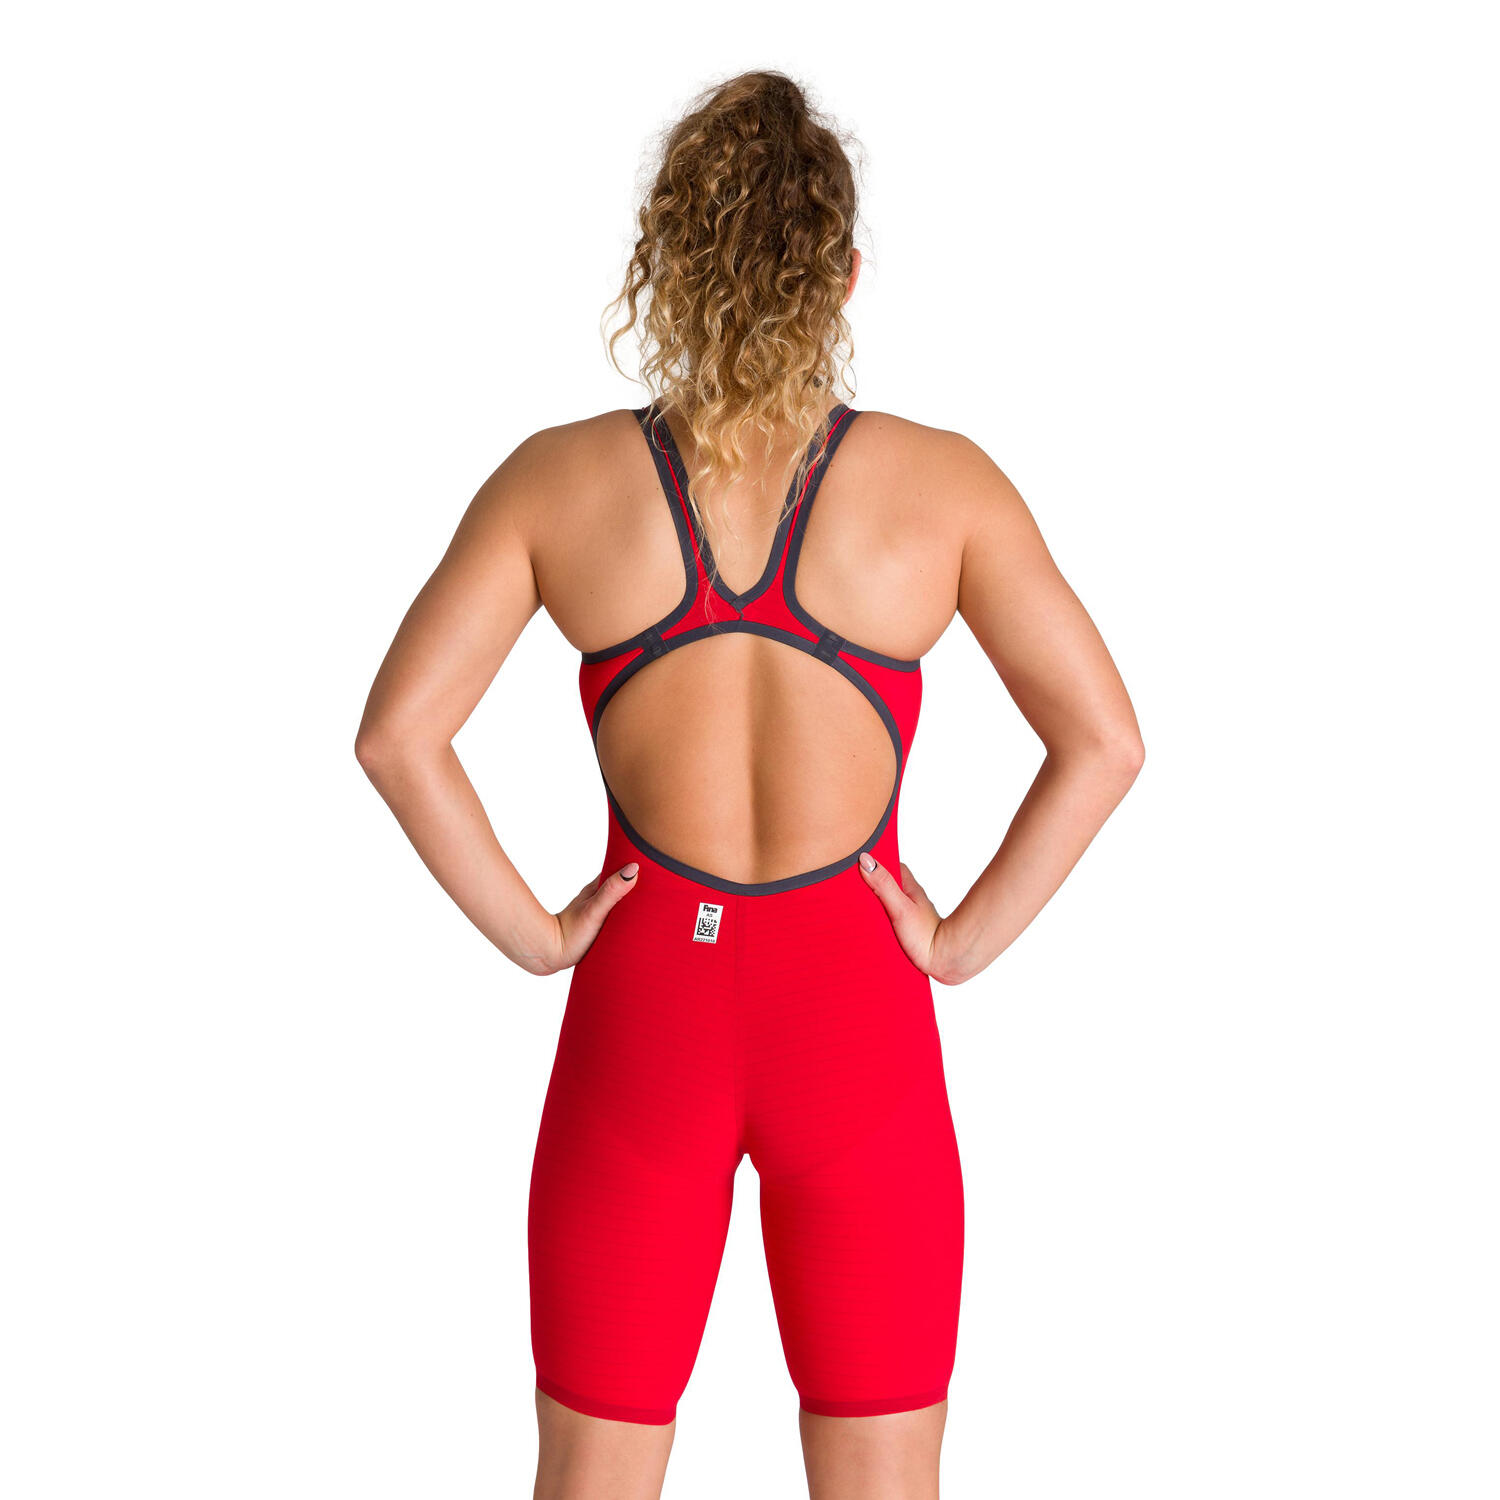 Arena Powerskin Carbon Air² Open Back Kneeskin - Red / Blue 2/5